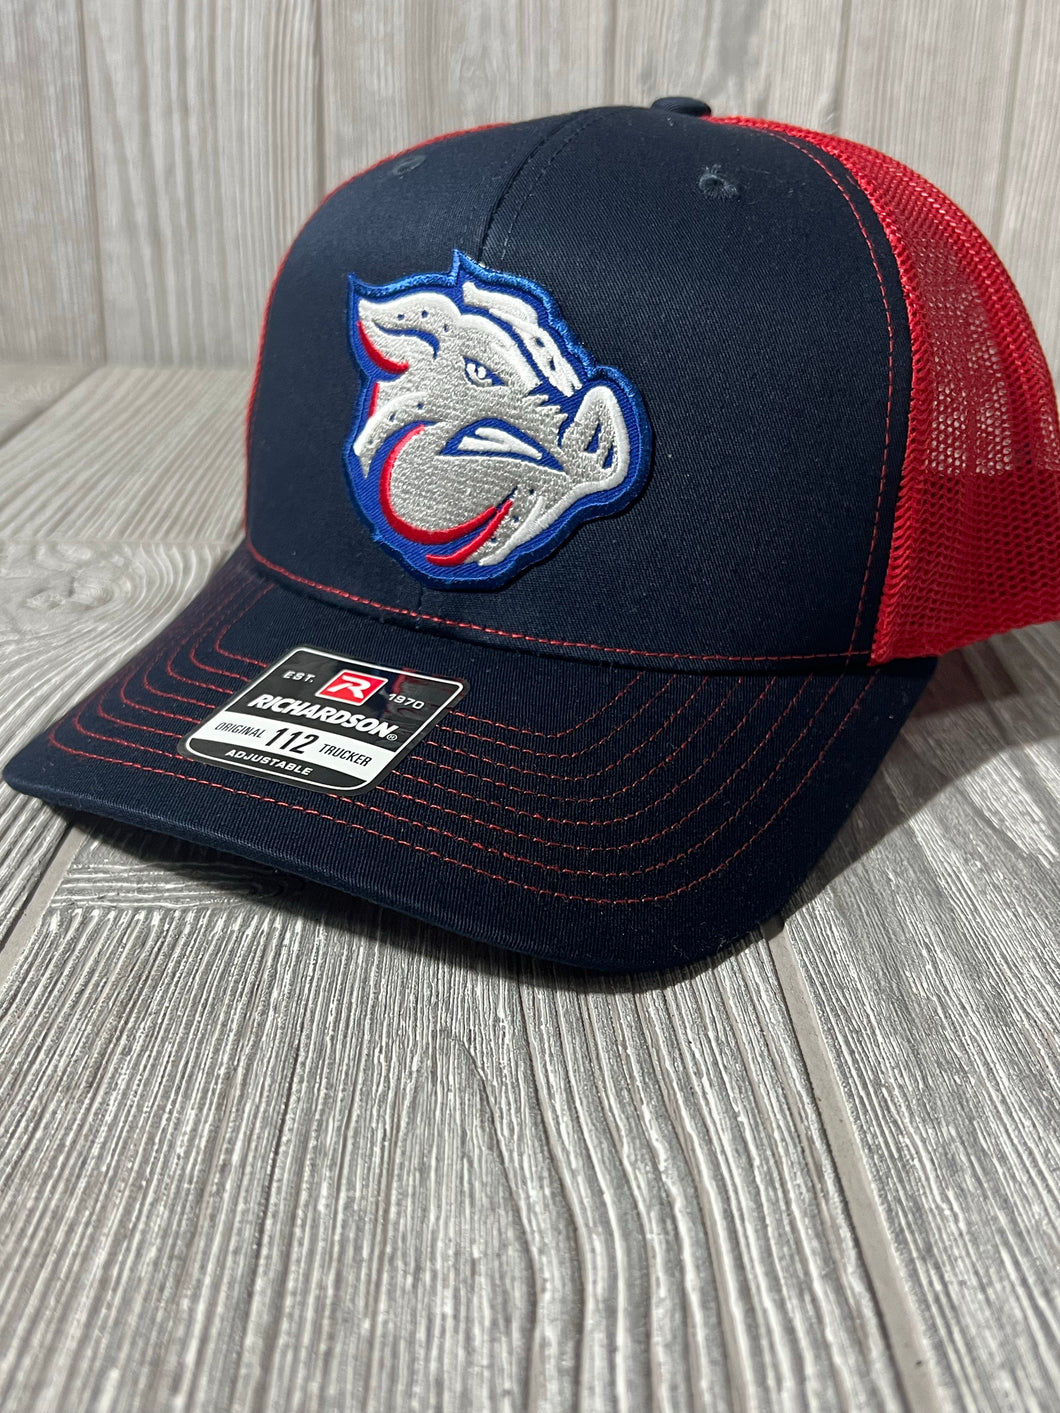 The Iron Pigs Little League Baseball Hat – Coley's Graphics